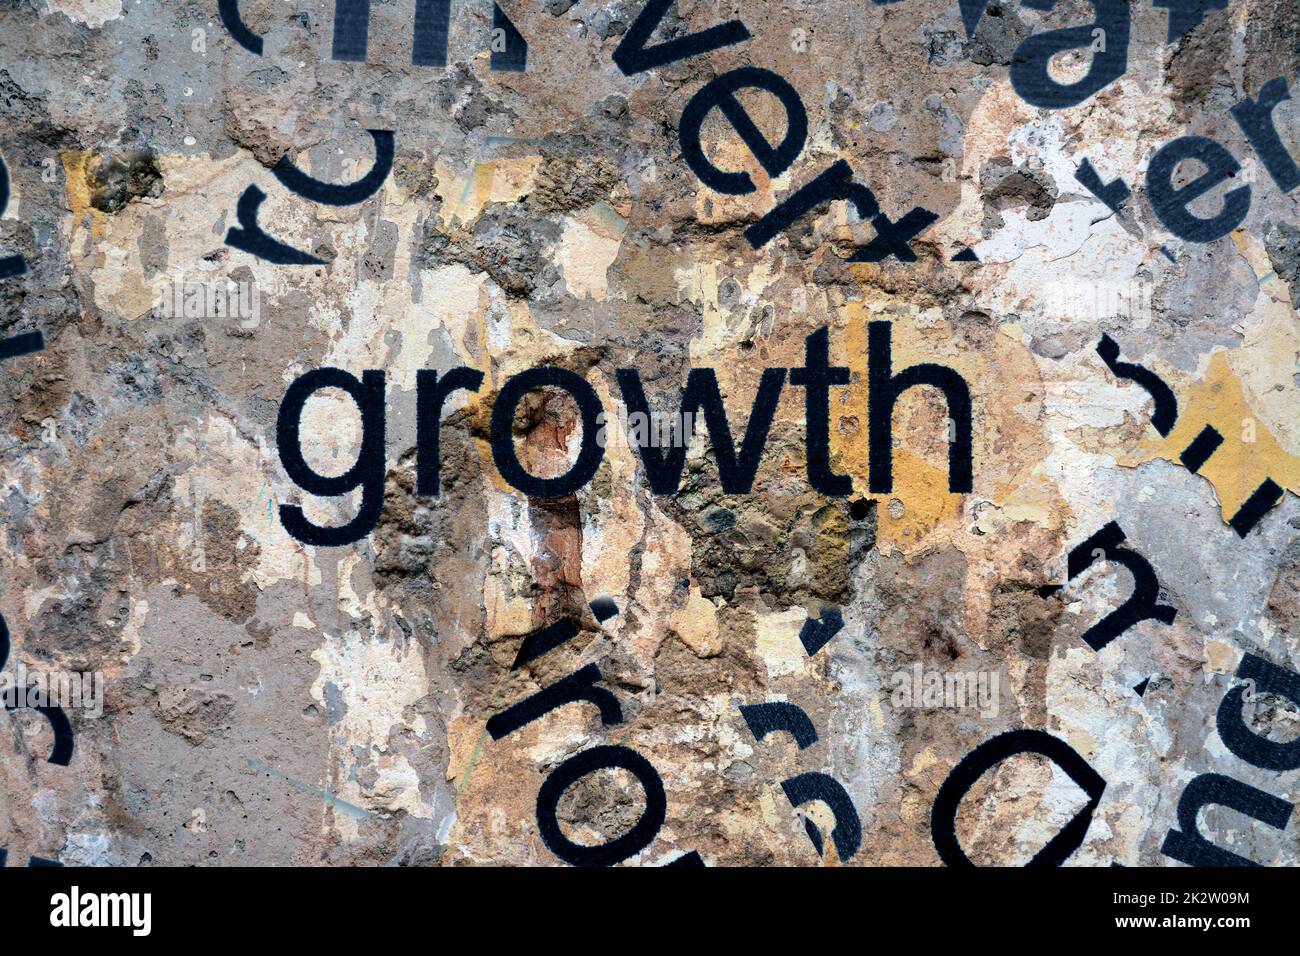 Growth concept Stock Photo